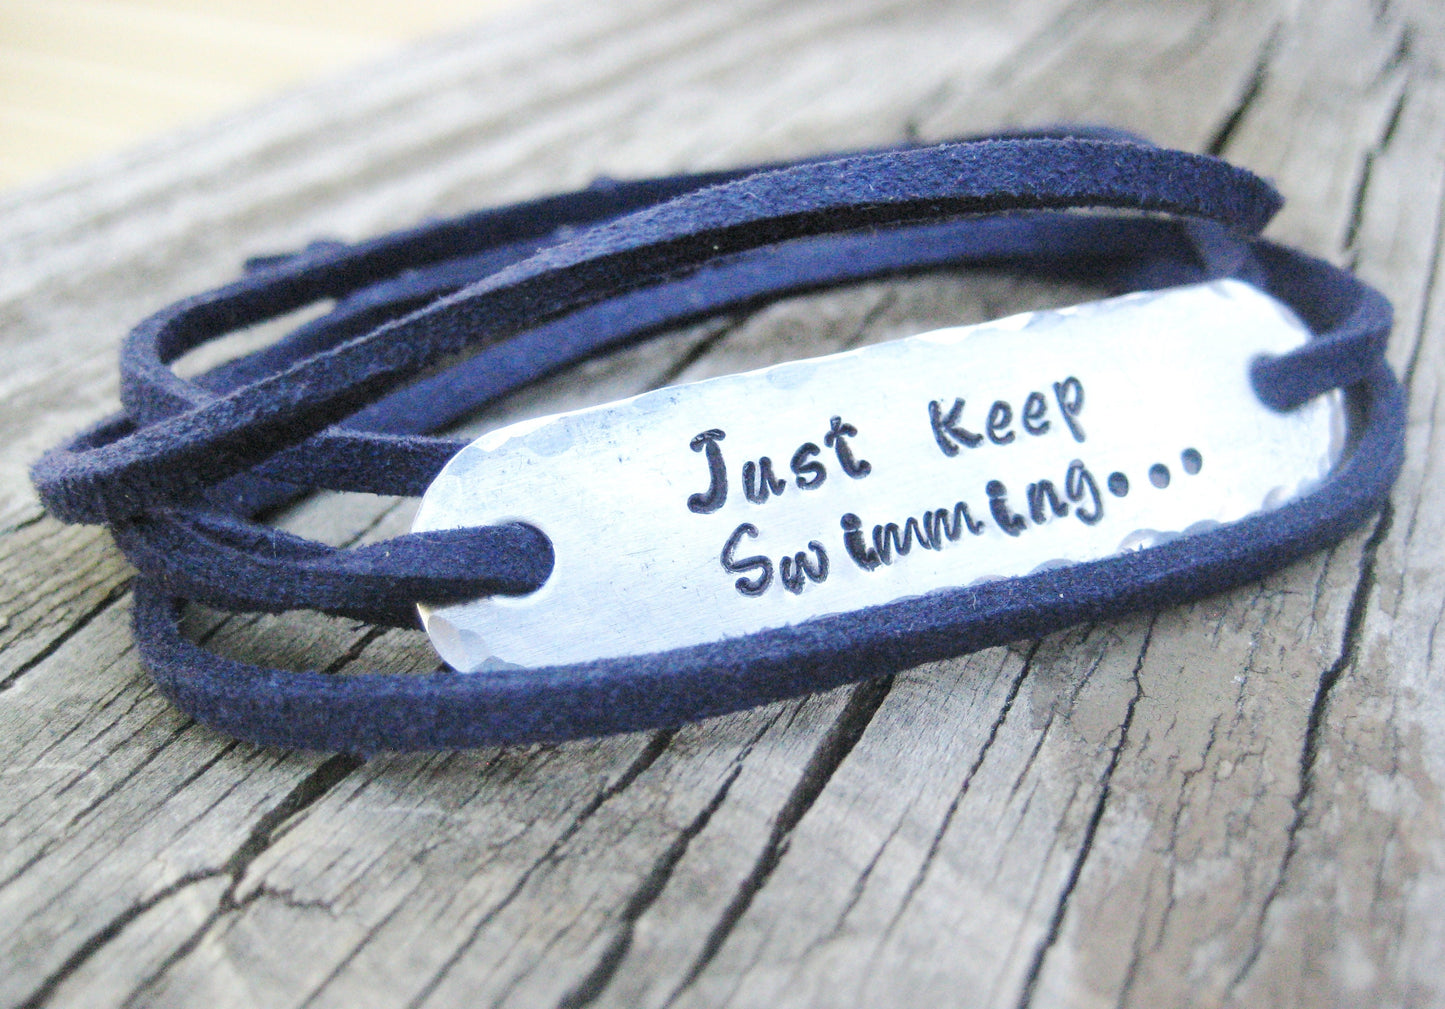 PERSONALIZED BRACELET WRAP - Just Keep Swimming, Hand Stamped, Bracelet Wrap, Encouragement gift,  with suede cord